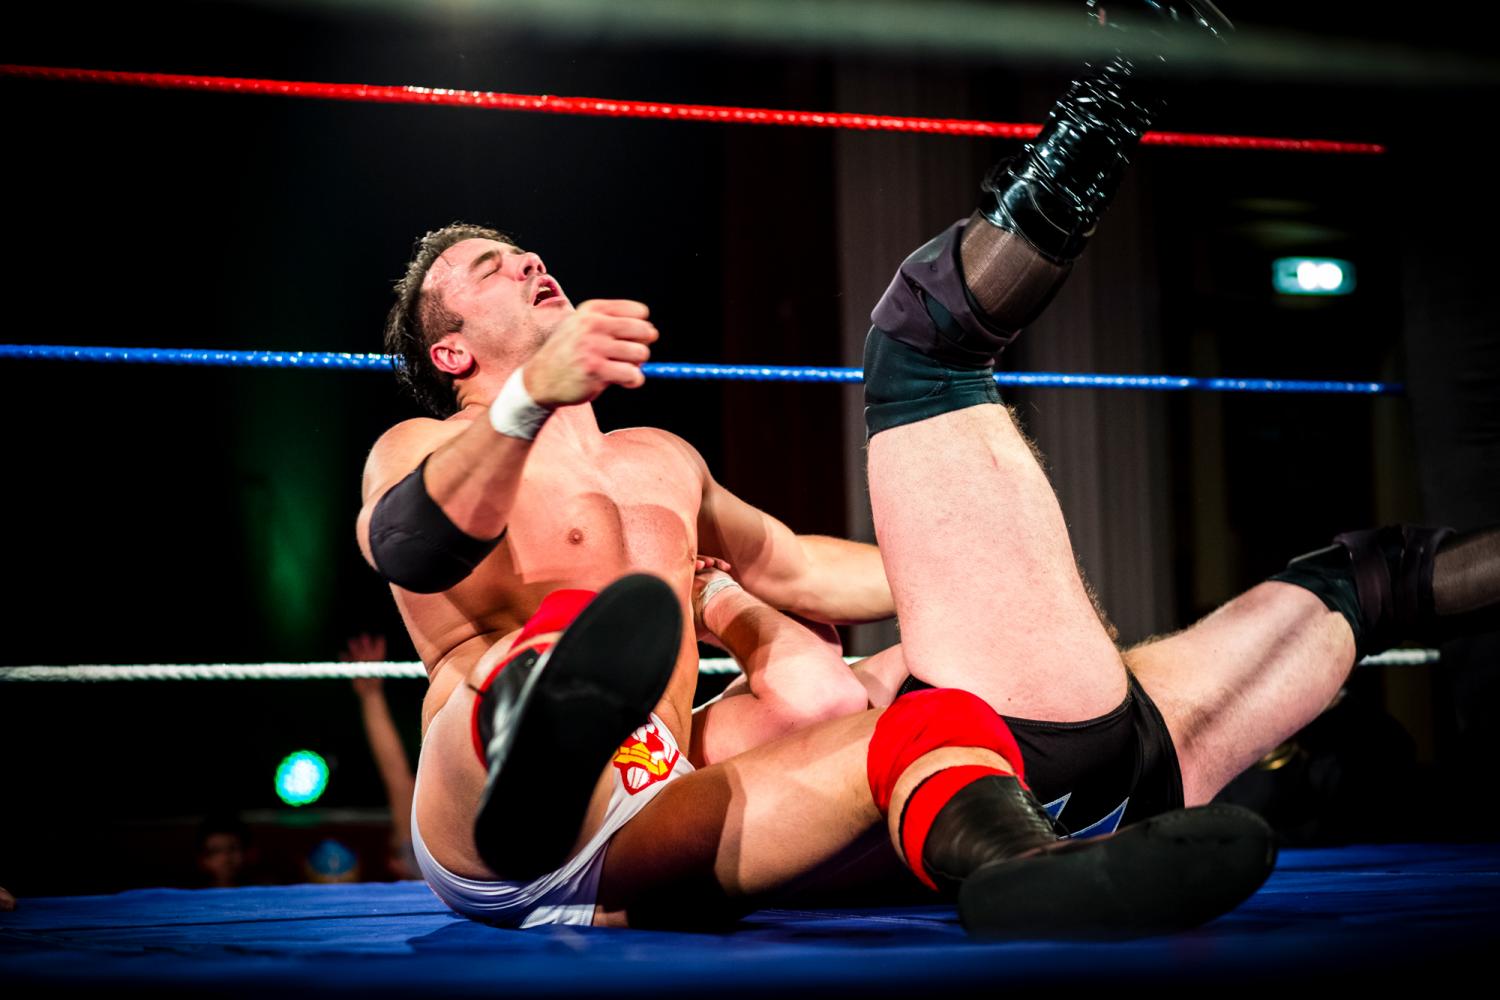 A male wrestler sits exhausted in the ring, next to another more obscured wrestler with his legs in the air.